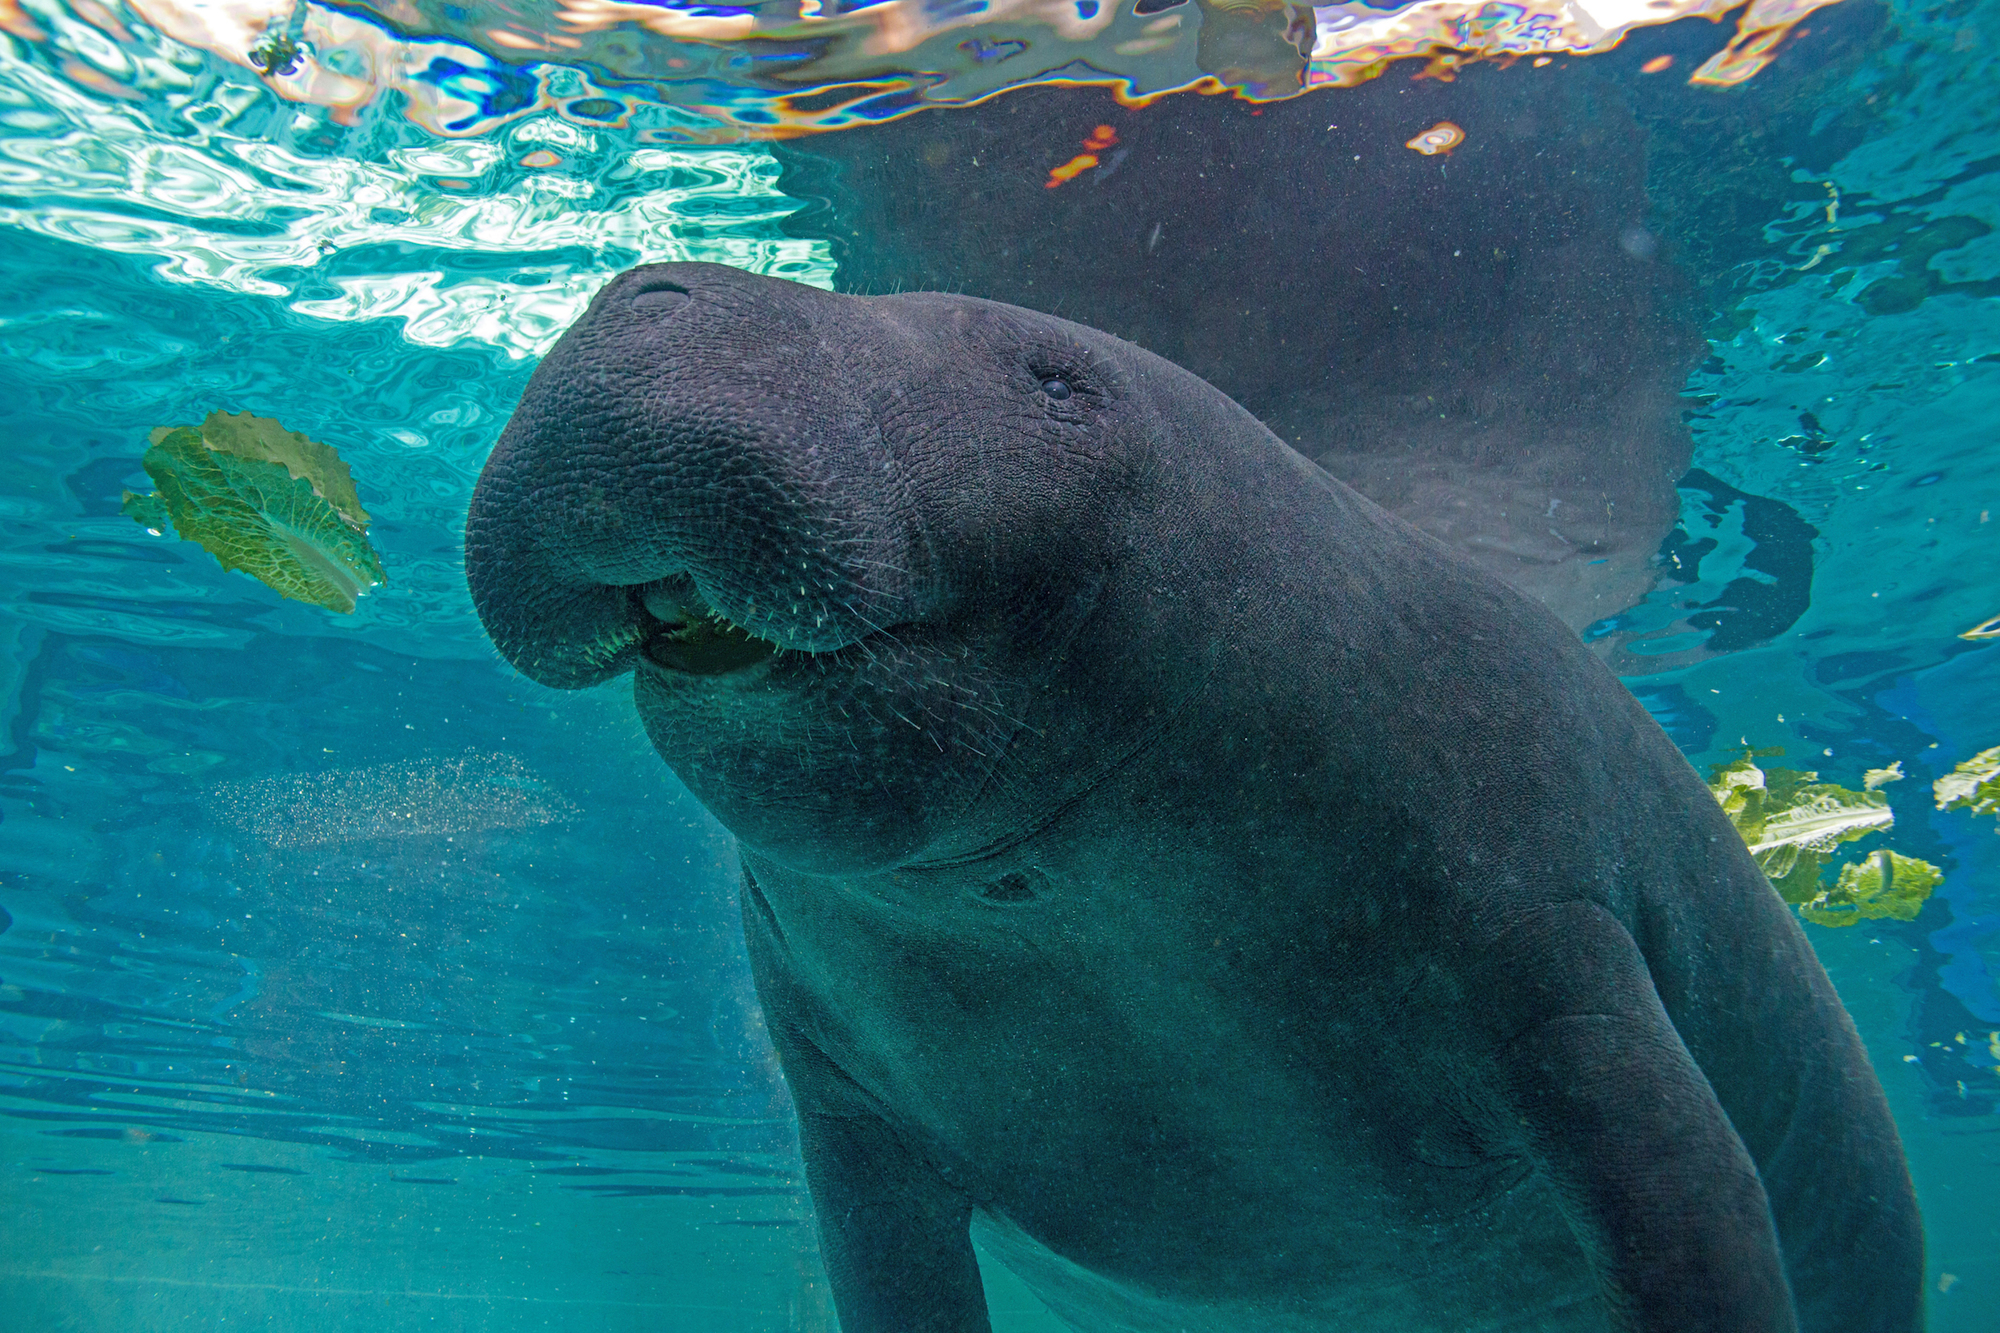 Watching the Mote manatees swim in circles is way better than binge watching another TV show, right?